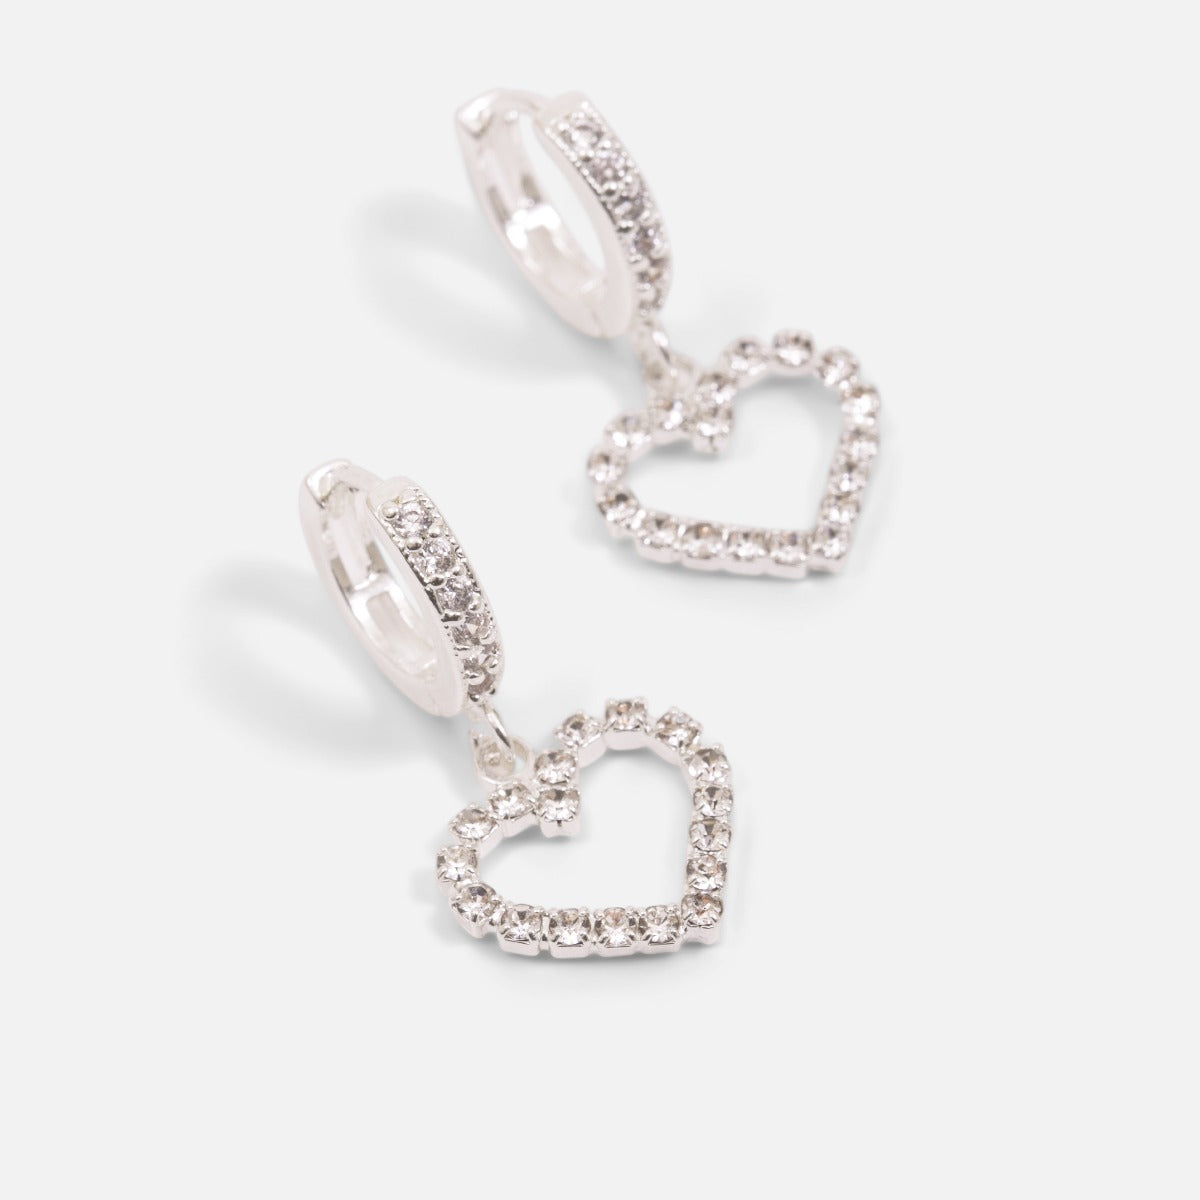 Silvered hoop earrings with sparkling stones and a heart charm